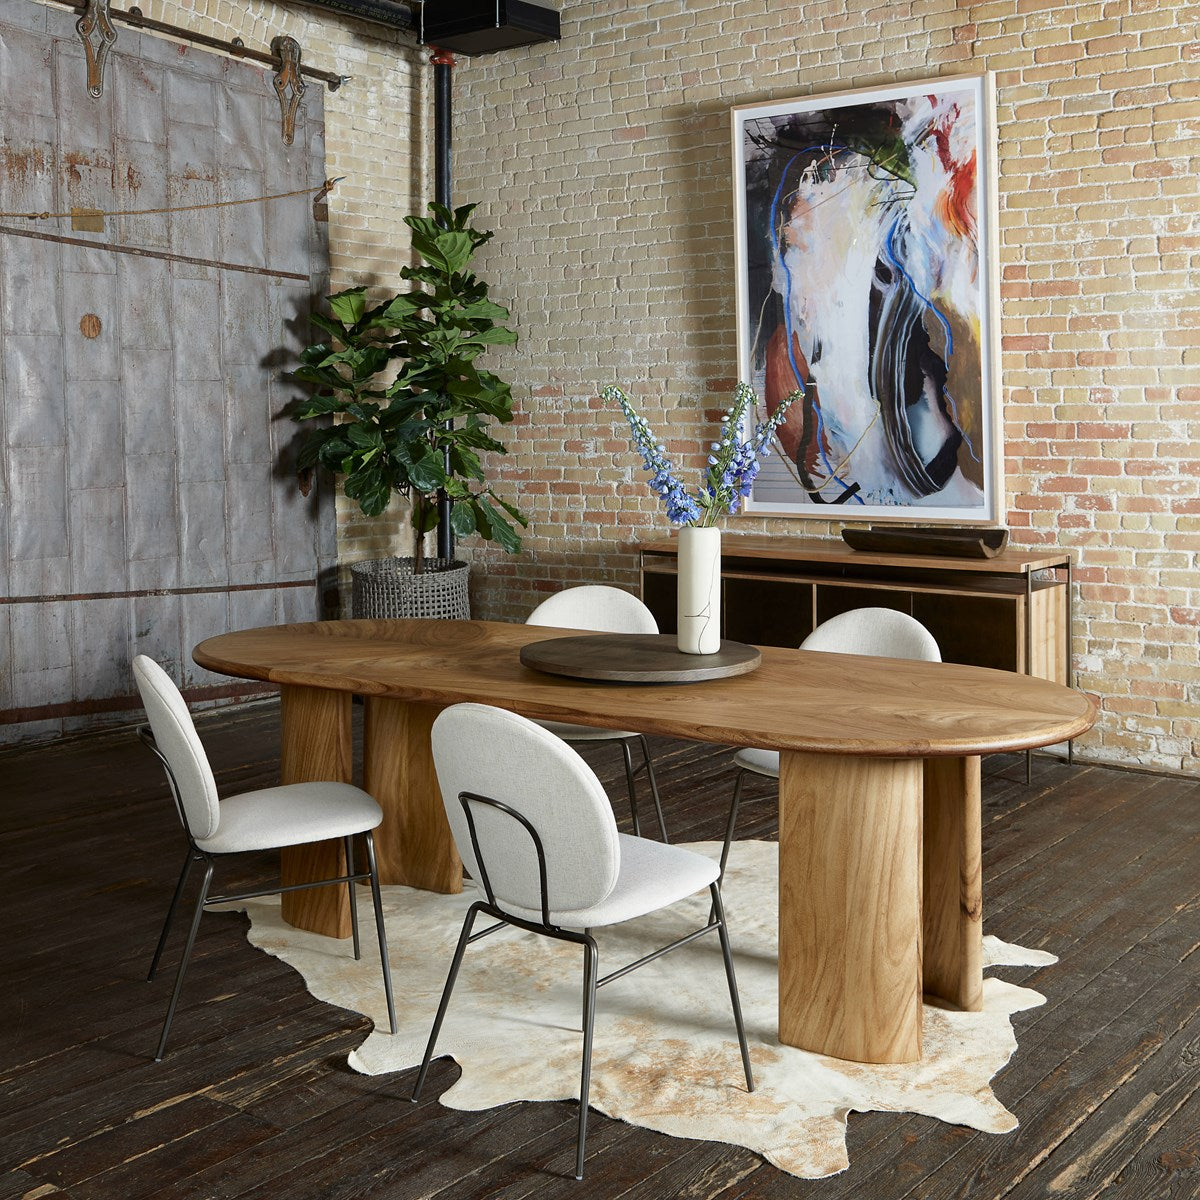 Lunas Oval Dining Table Dining Table Four Hands     Four Hands, Burke Decor, Mid Century Modern Furniture, Old Bones Furniture Company, Old Bones Co, Modern Mid Century, Designer Furniture, https://www.oldbonesco.com/